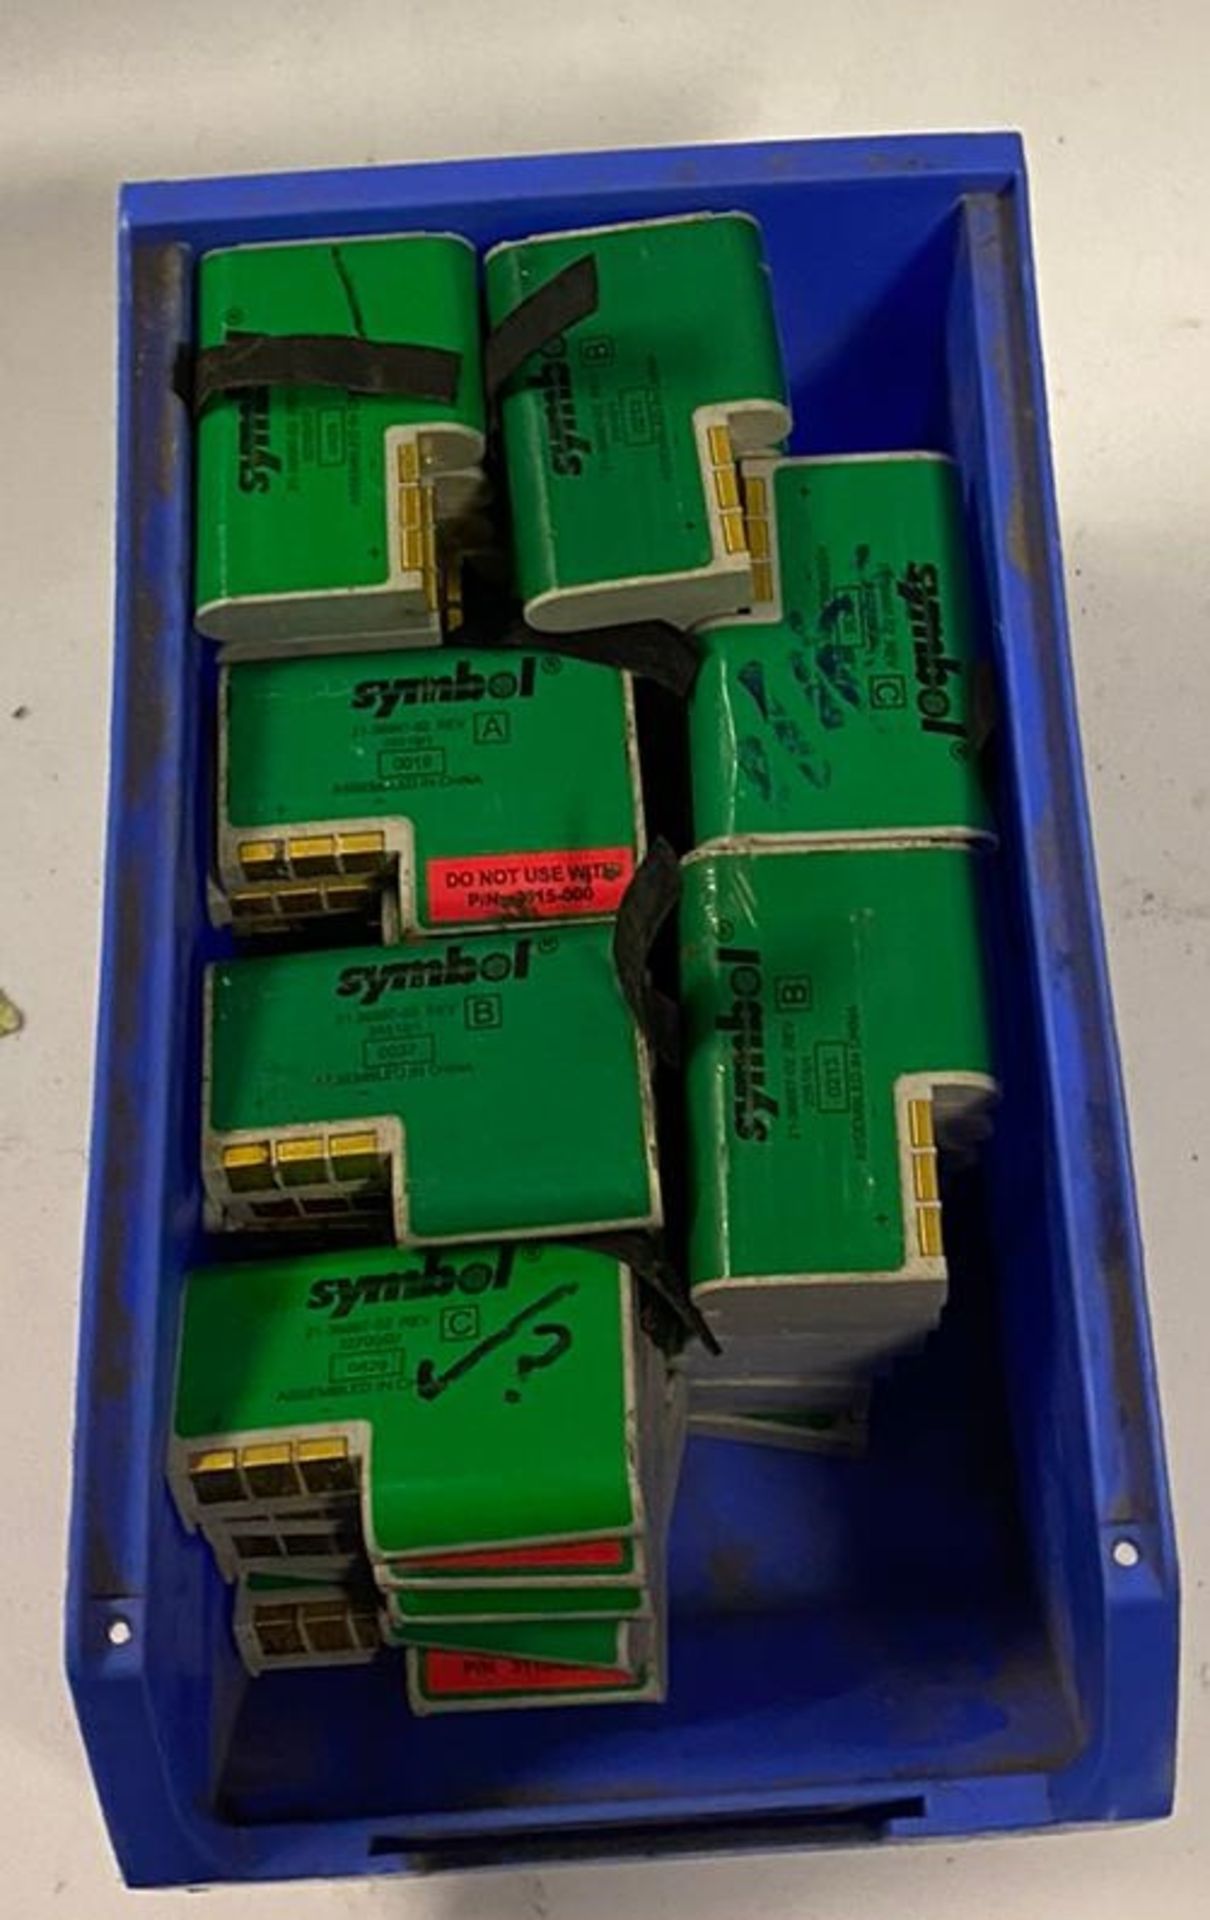 20 x Symbol 21-36897-02 Rechargeable Batteries 6.0 V 750mAh - Ref:21-36897-02 - Used Condition - - Image 4 of 5